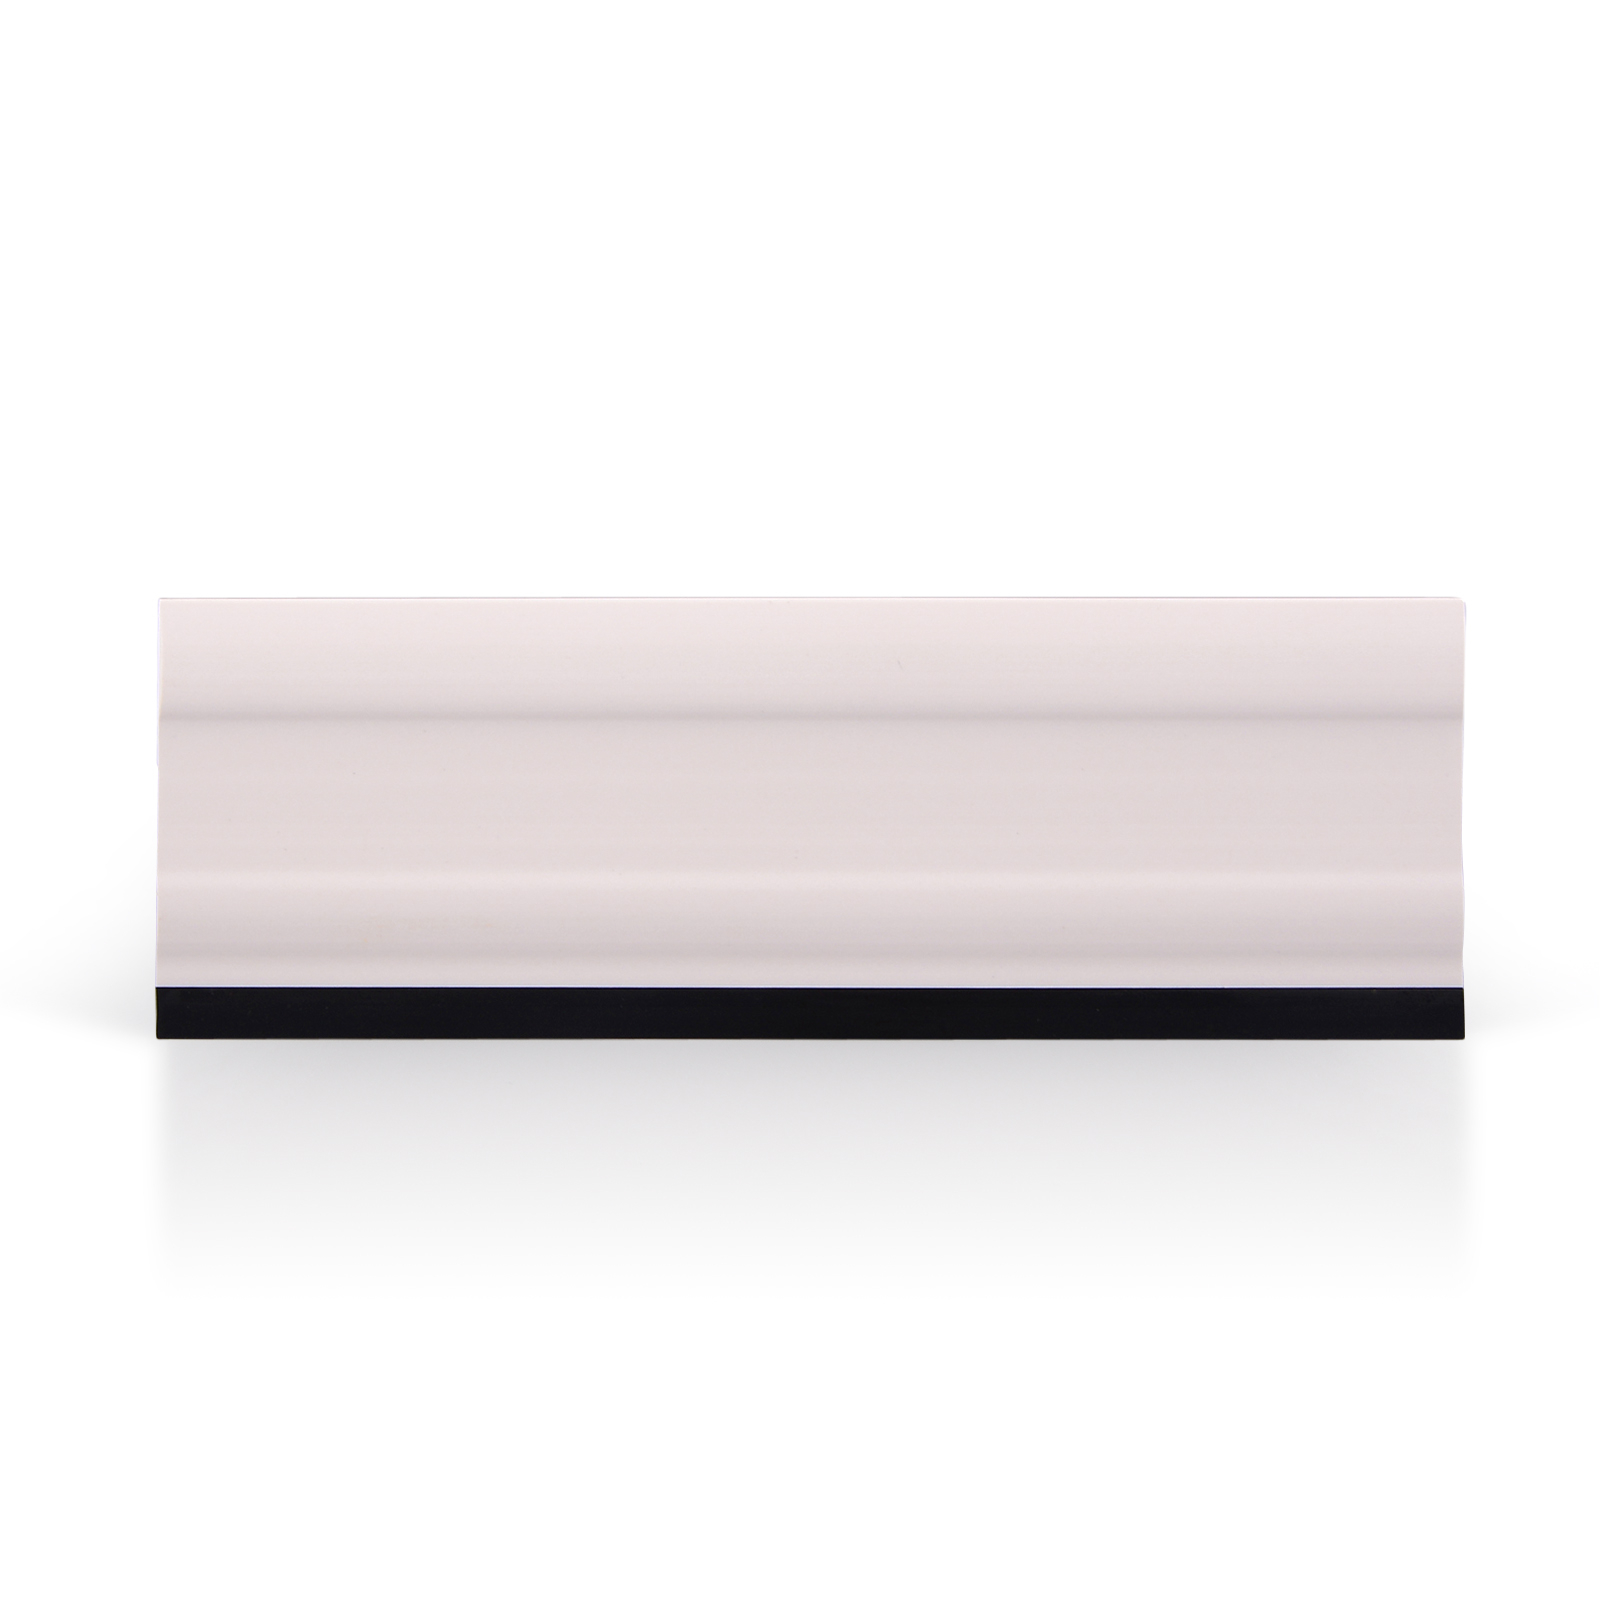 6'' x 2'' White Squeegee, with Black Soft Rubber Edge for Vinyl and Film Application